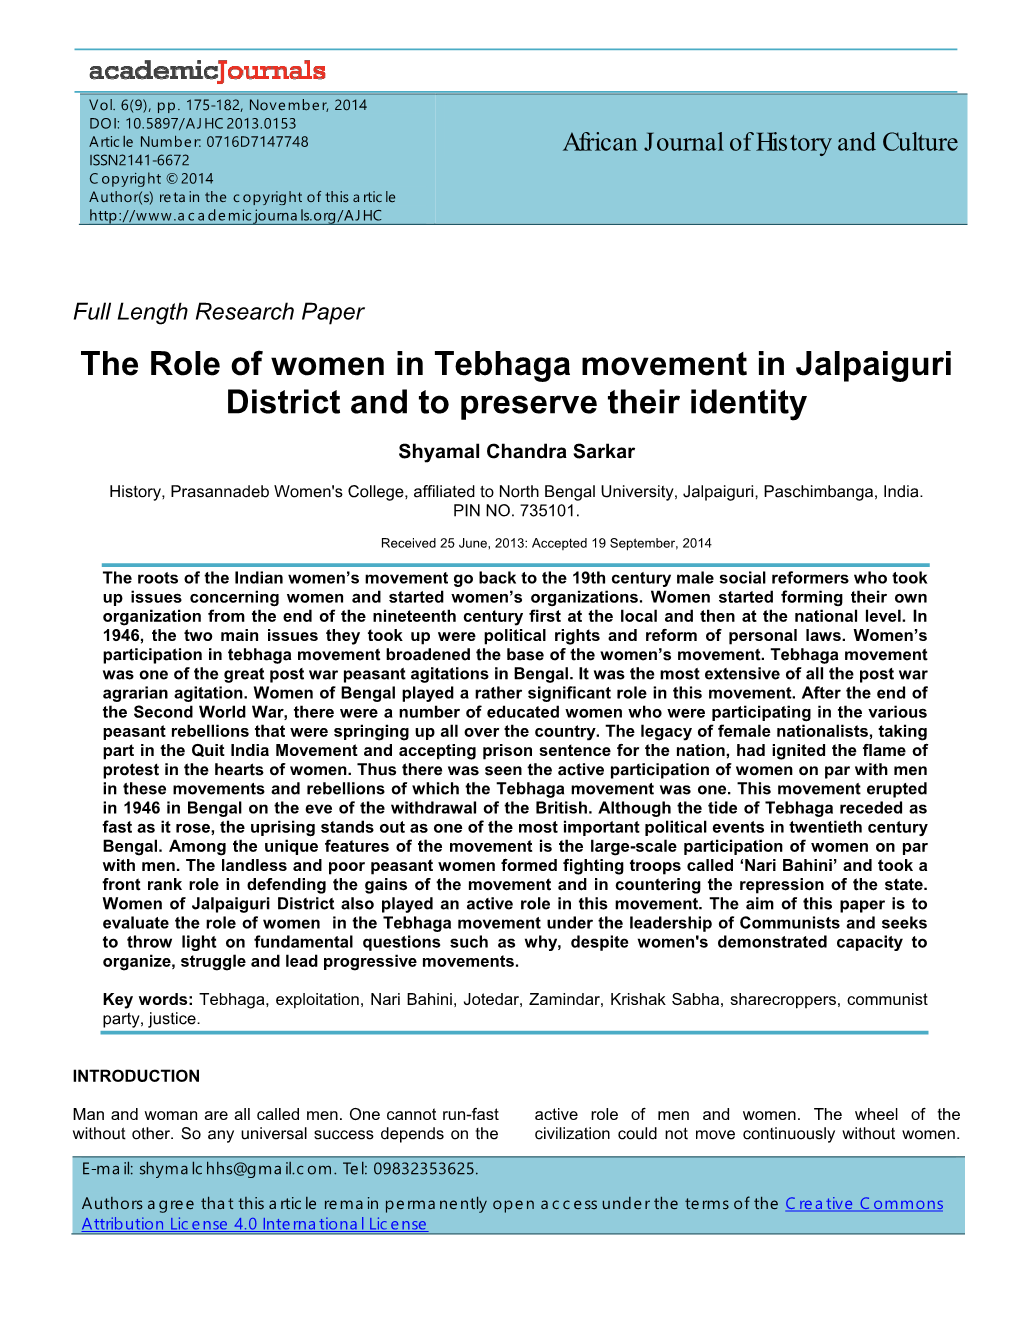 The Role of Women in Tebhaga Movement in Jalpaiguri District and to Preserve Their Identity